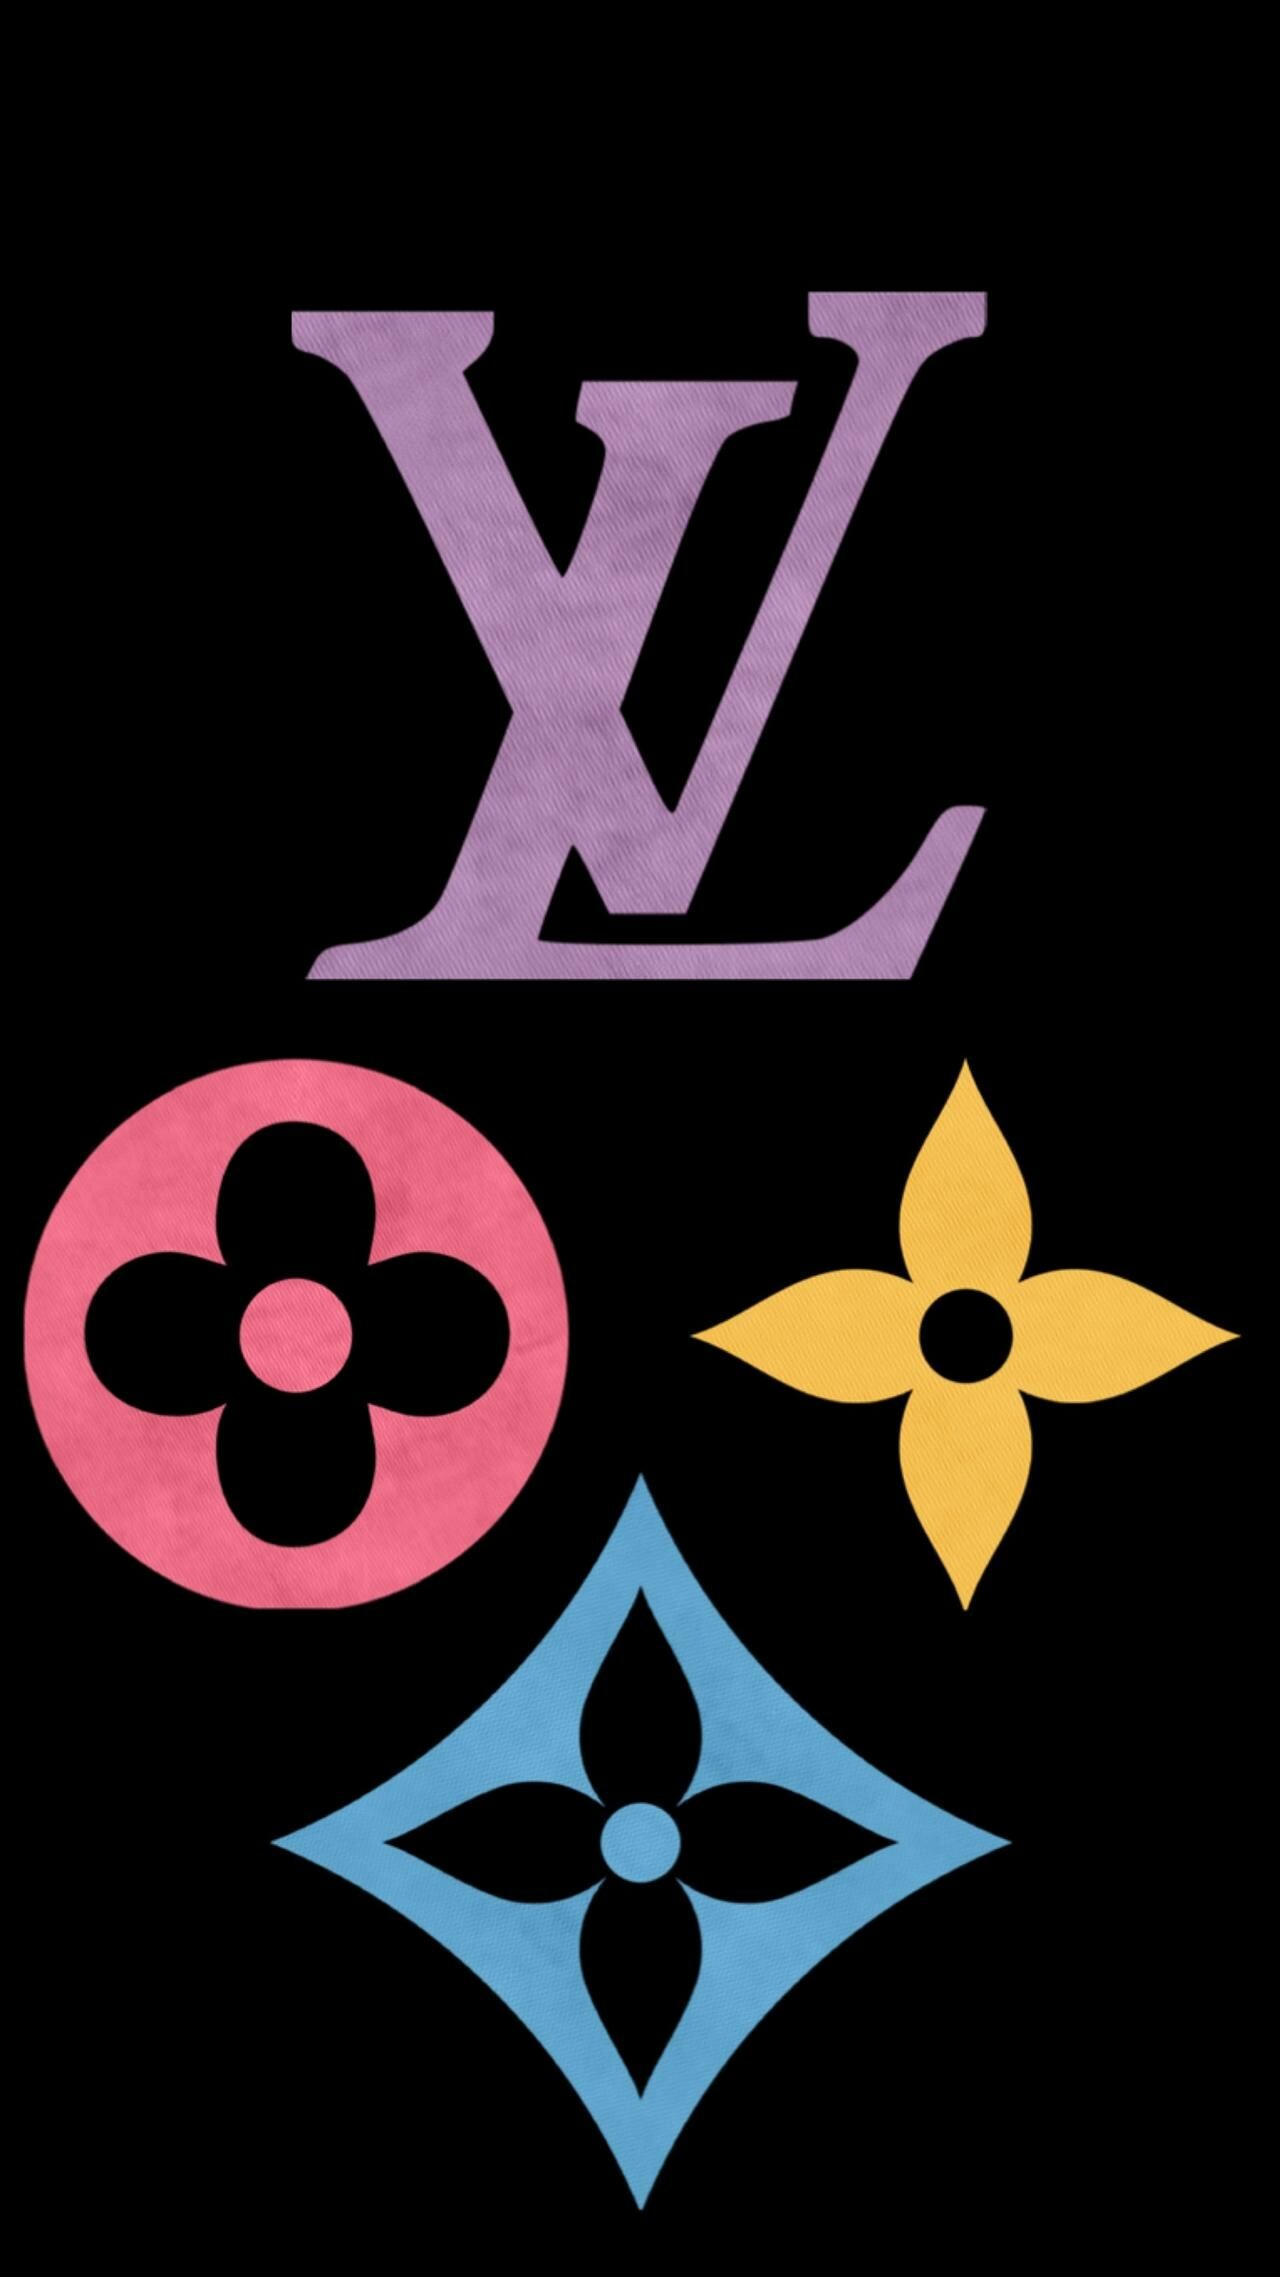 Louis Vuitton: The brand's iconic monogram has been updated and modernized over the years. 1280x2280 HD Background.